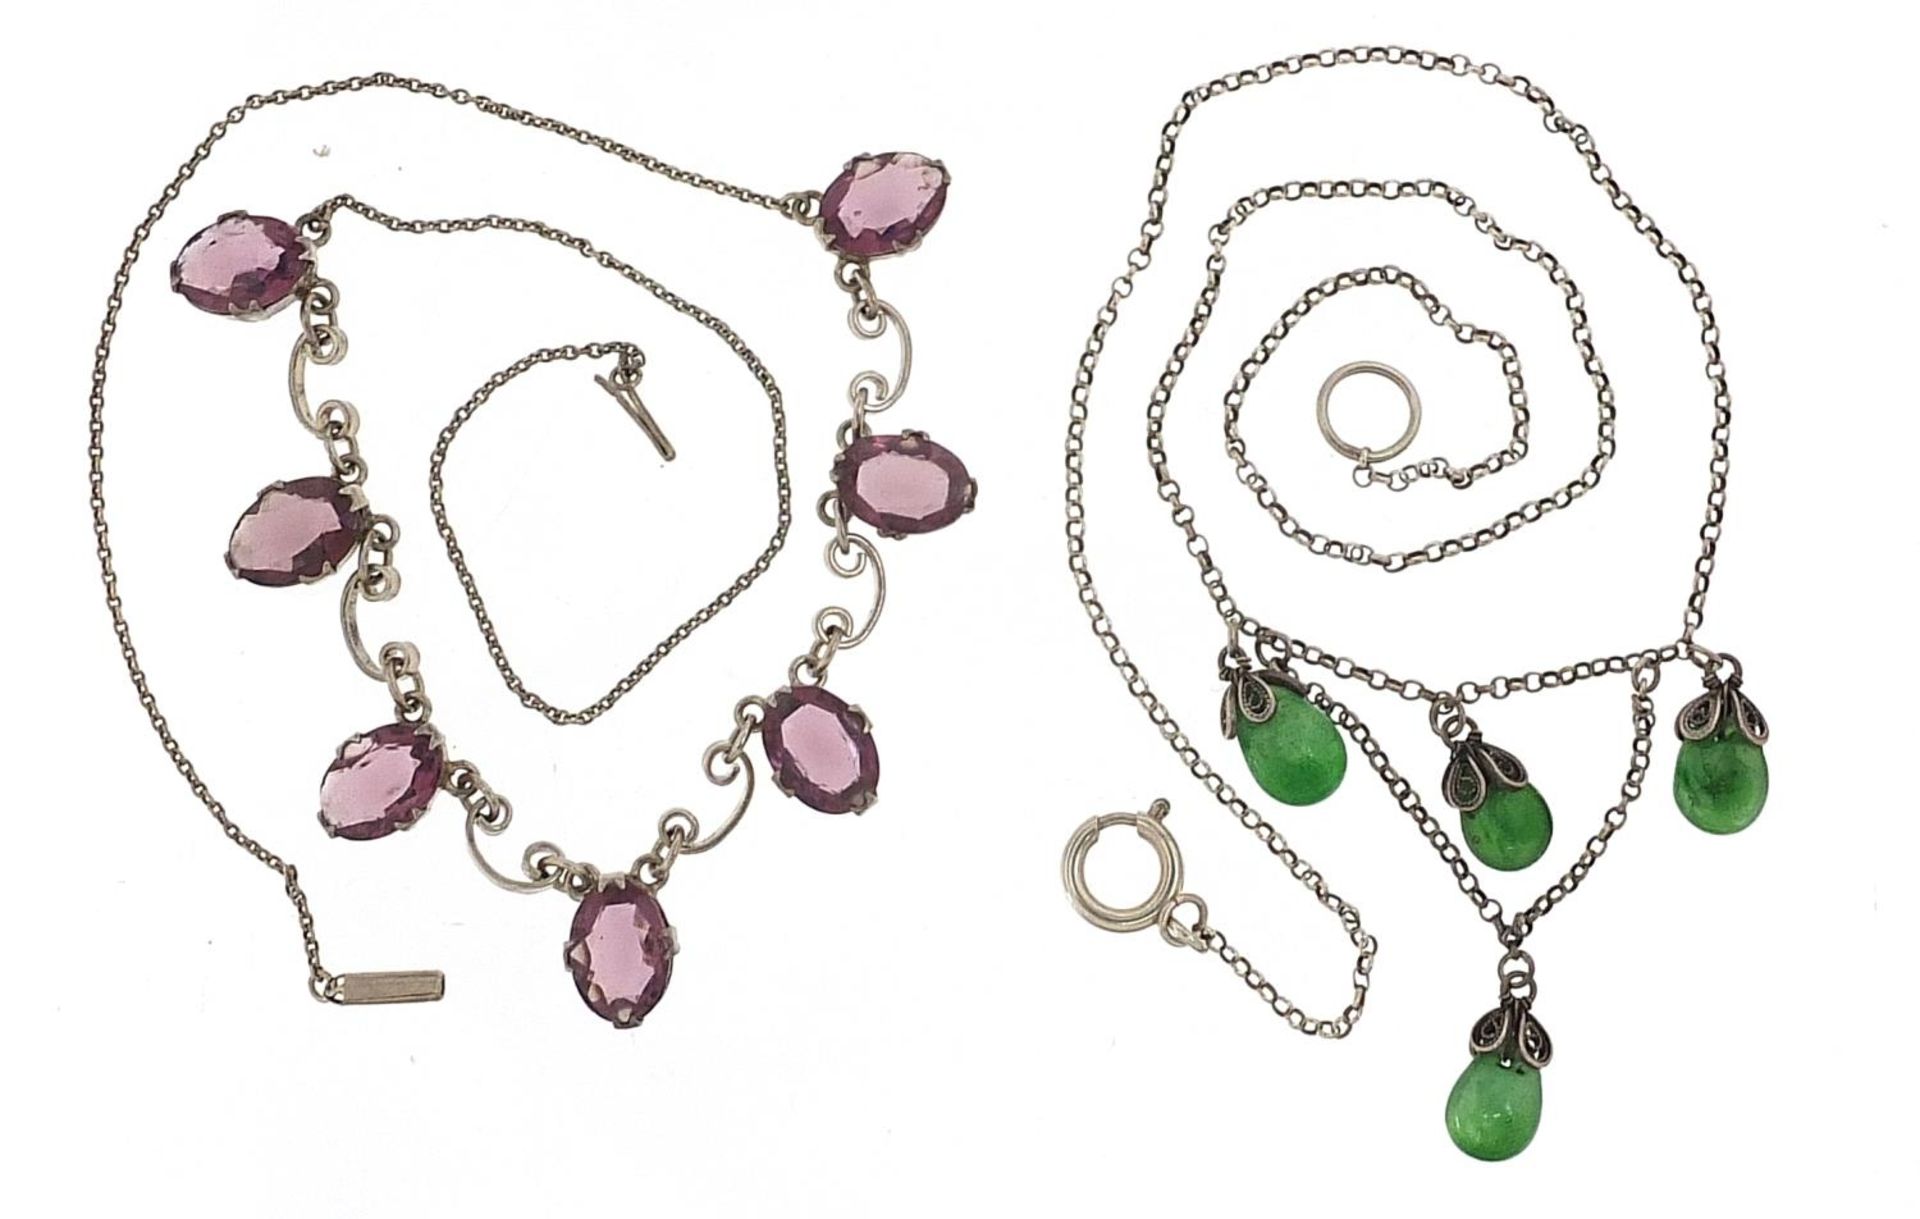 Two Sterling silver necklaces set with purple and green stones, 42cm and 40cm in length, 17.4g - Image 2 of 4